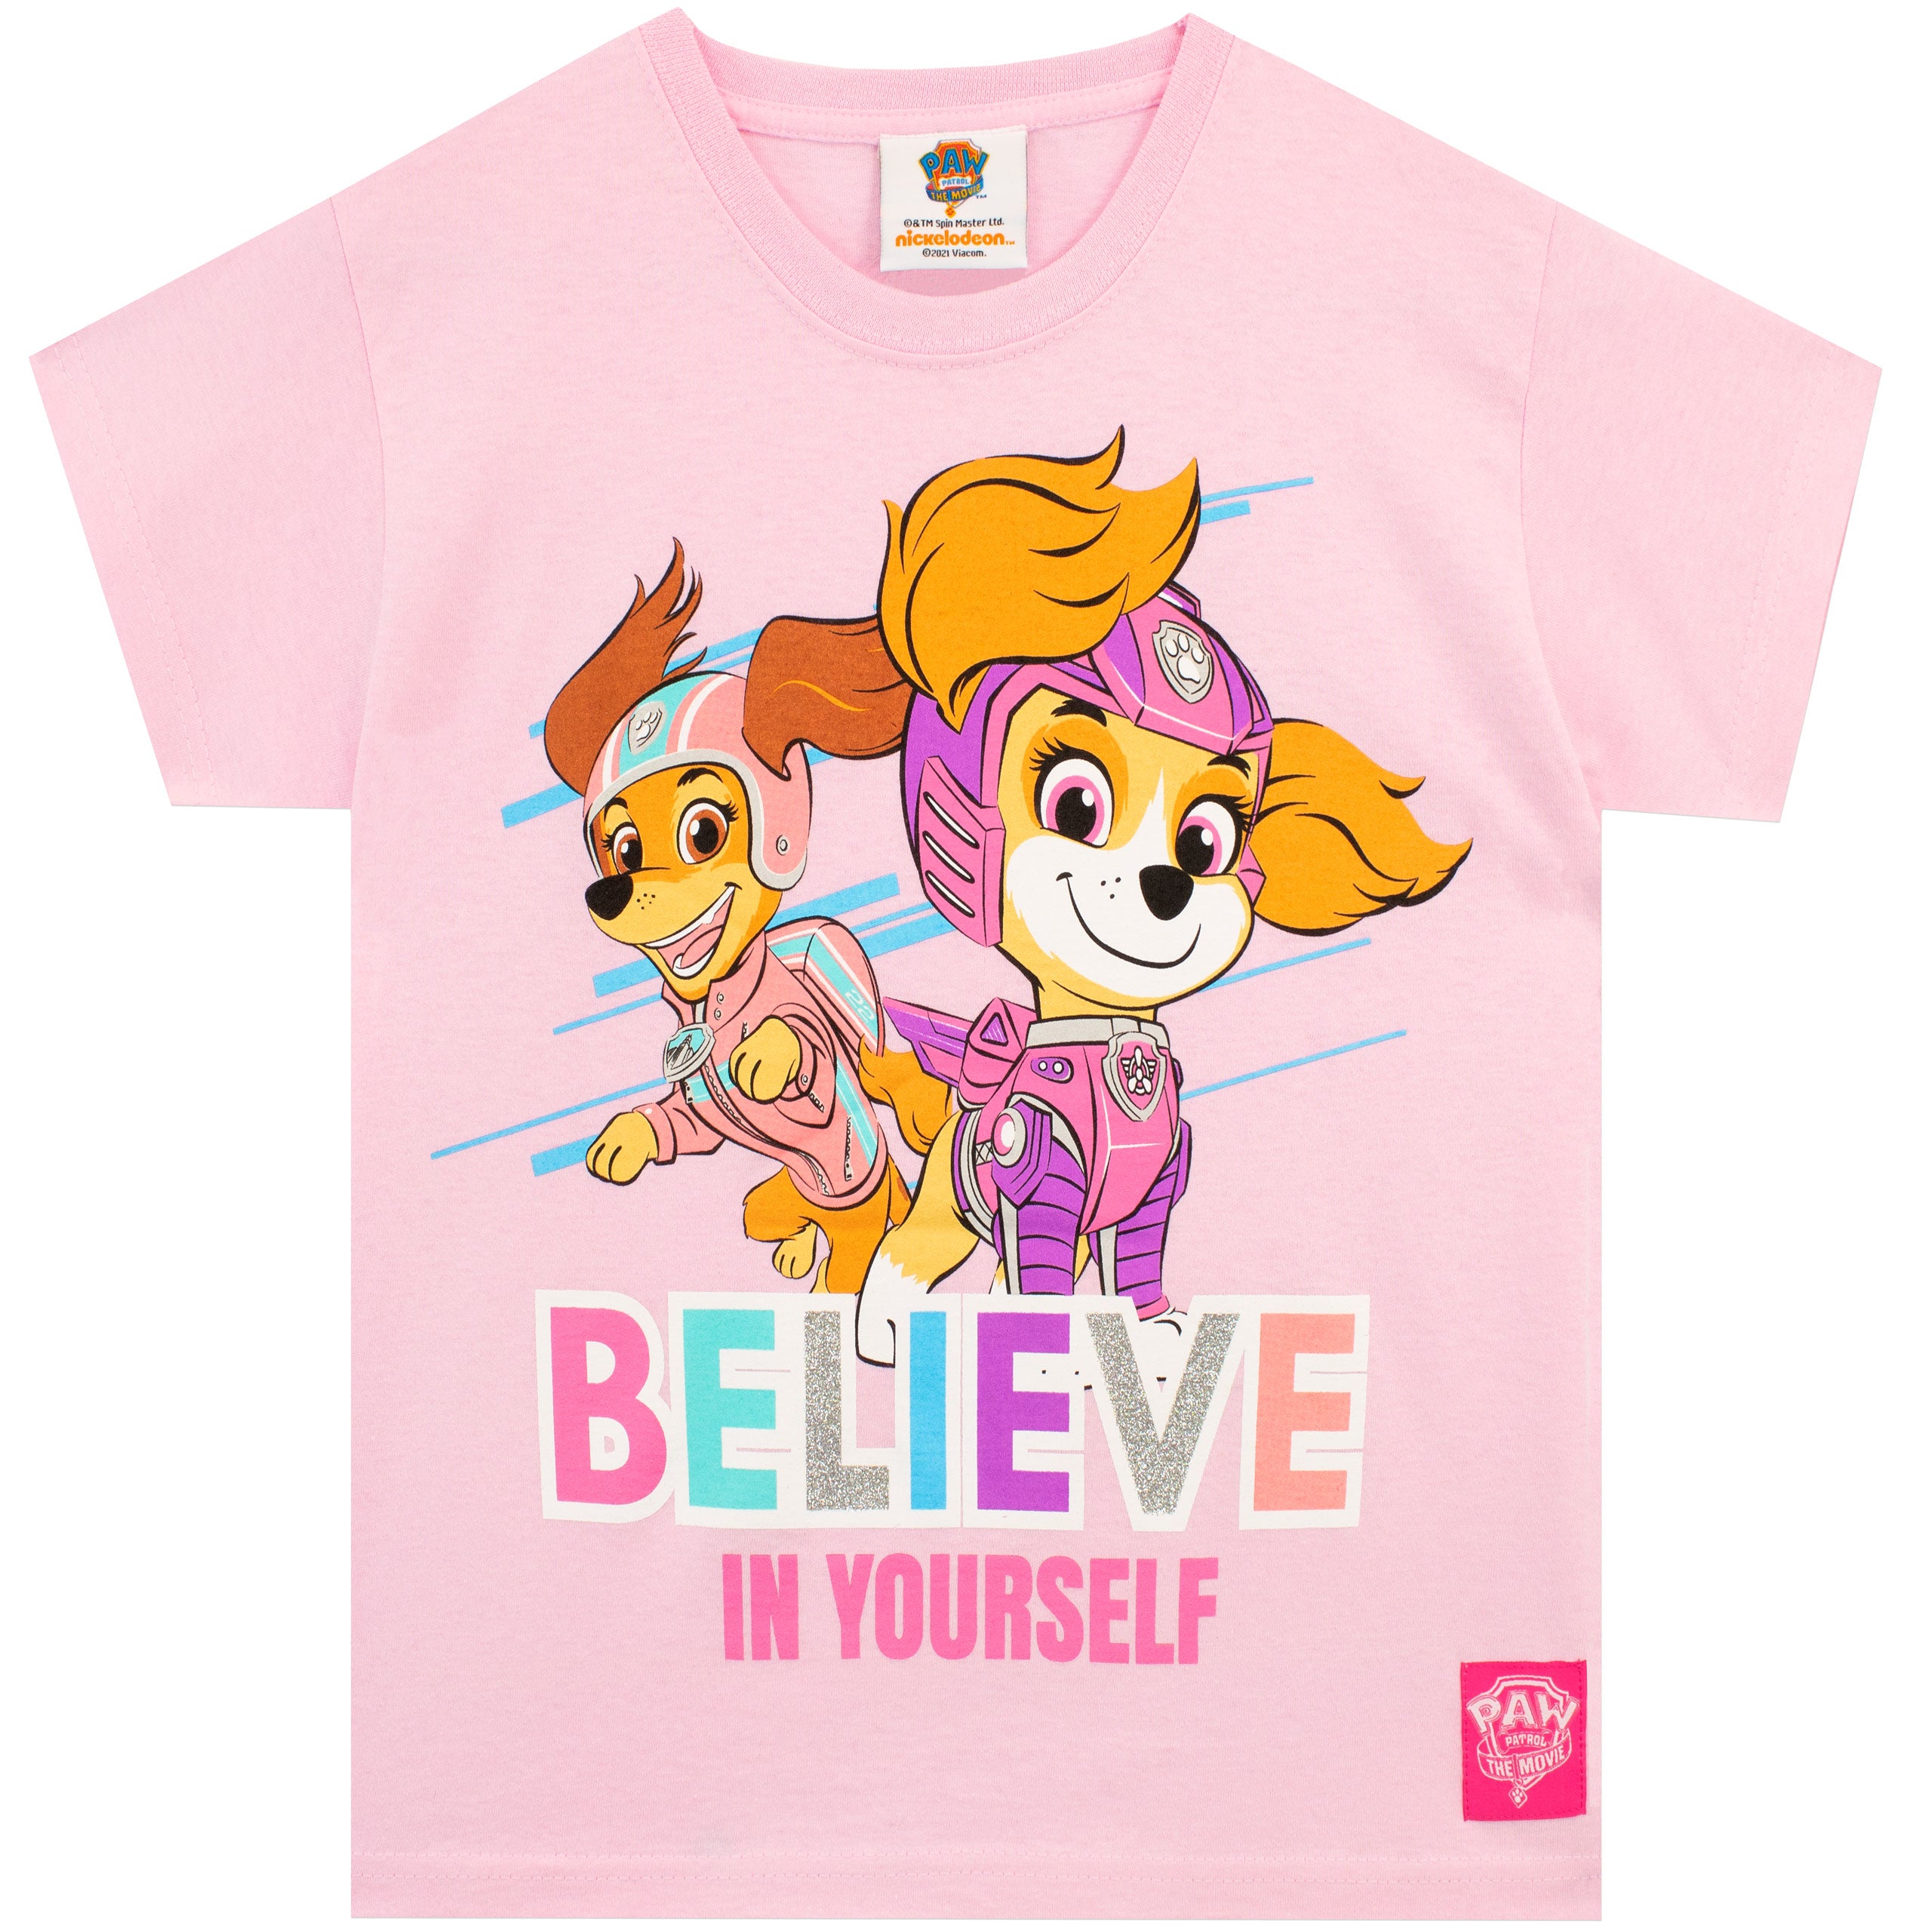 Buy Paw Patrol The Movie Tshirt | Kids | Character.com official merch